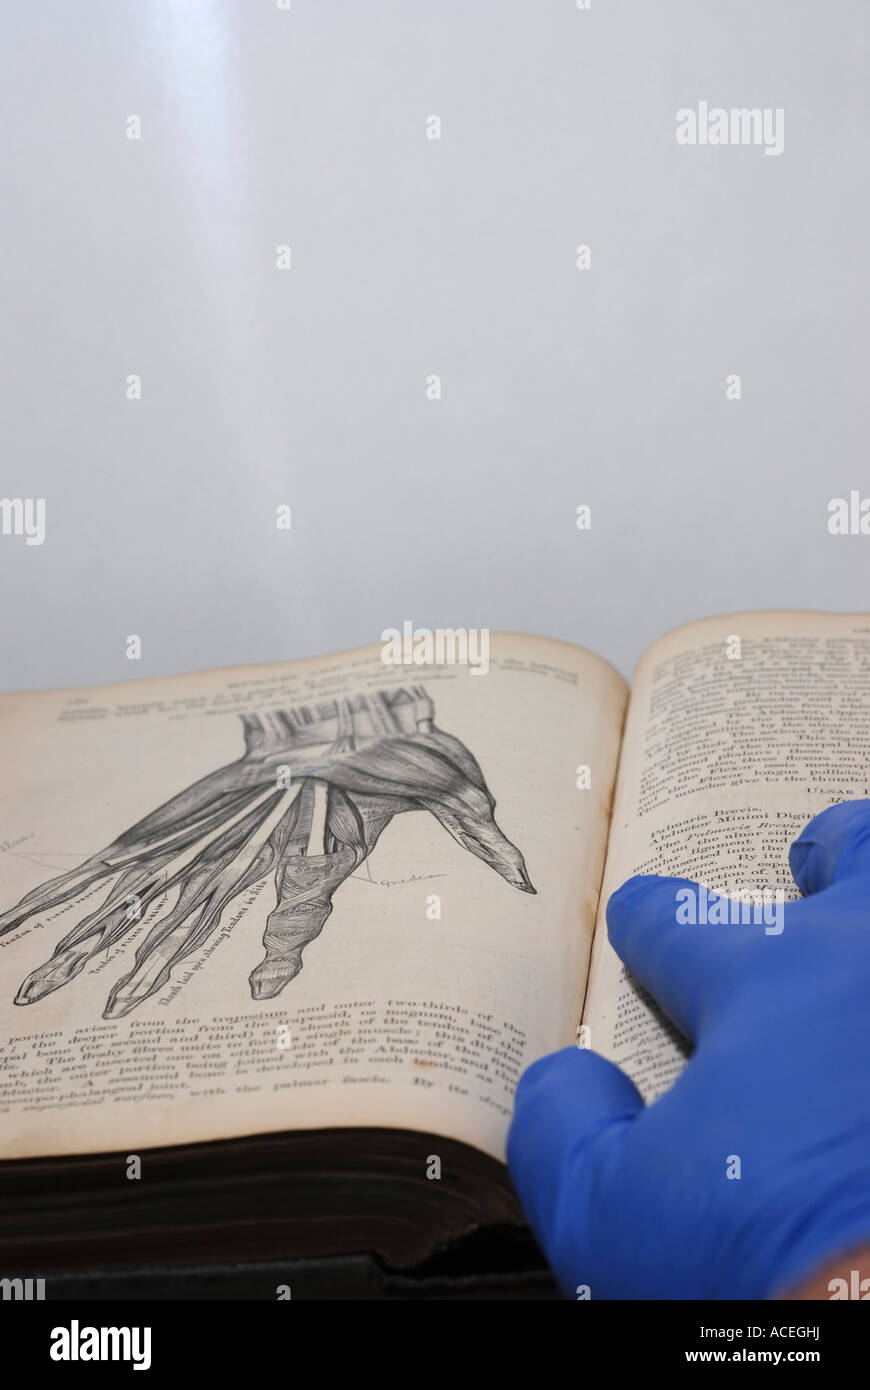 Researcher referencing a drawing of the palm of the hand in An open Anatomy text book Stock Photo